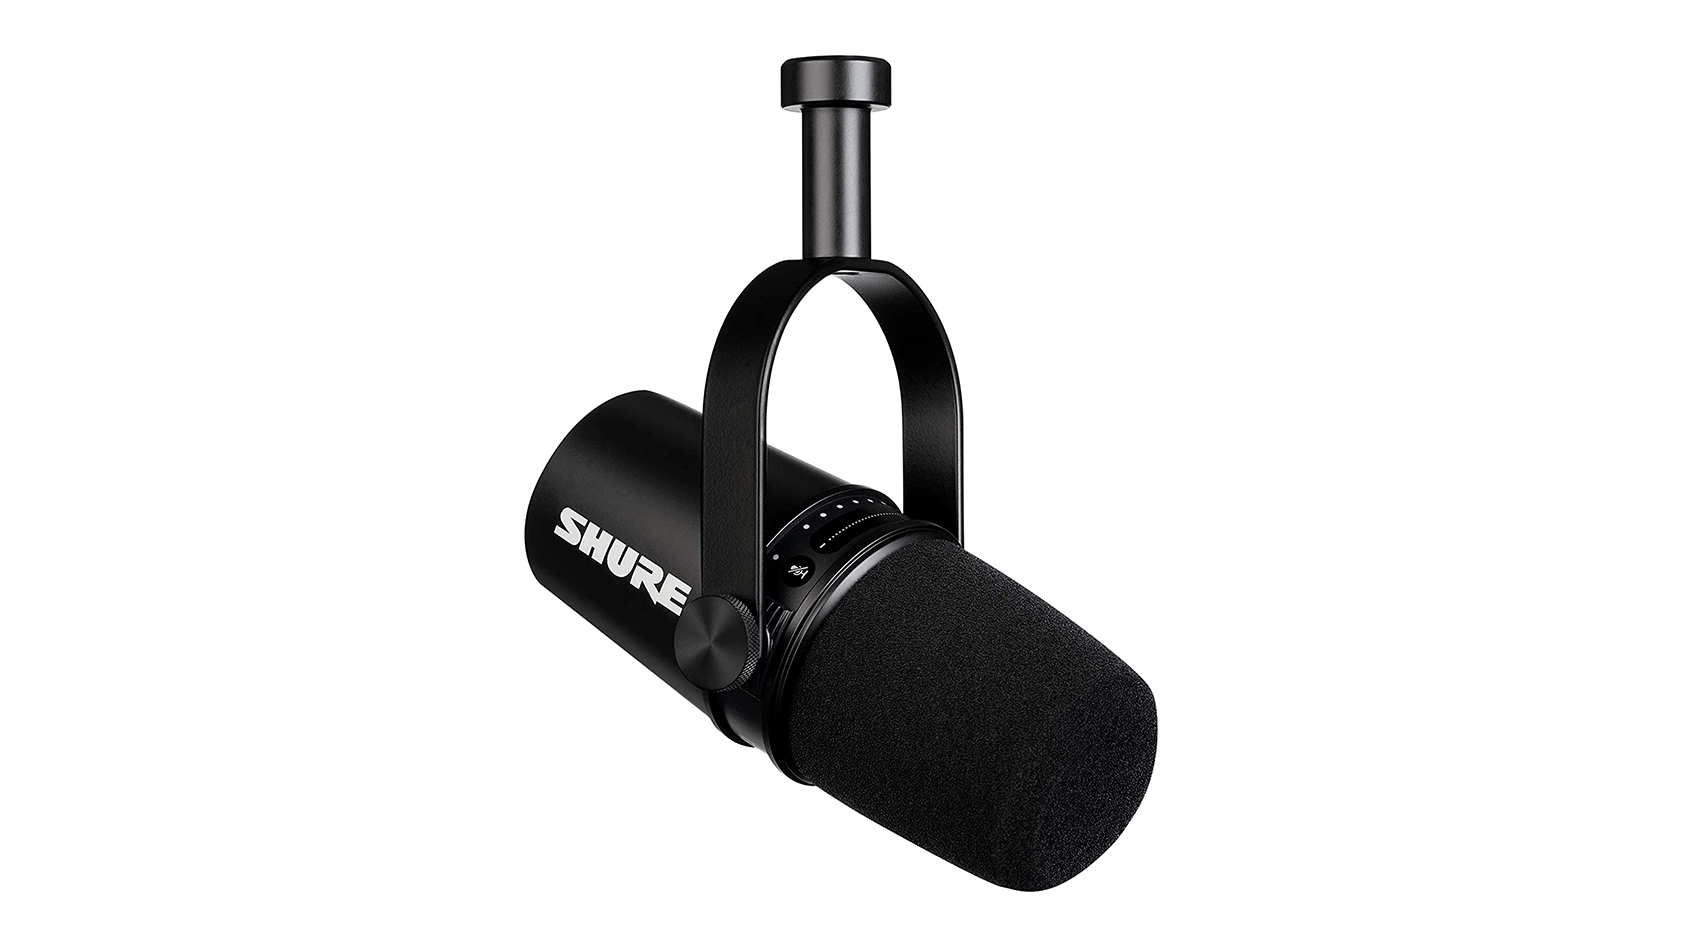 The Shure MV7 in black against a white background.